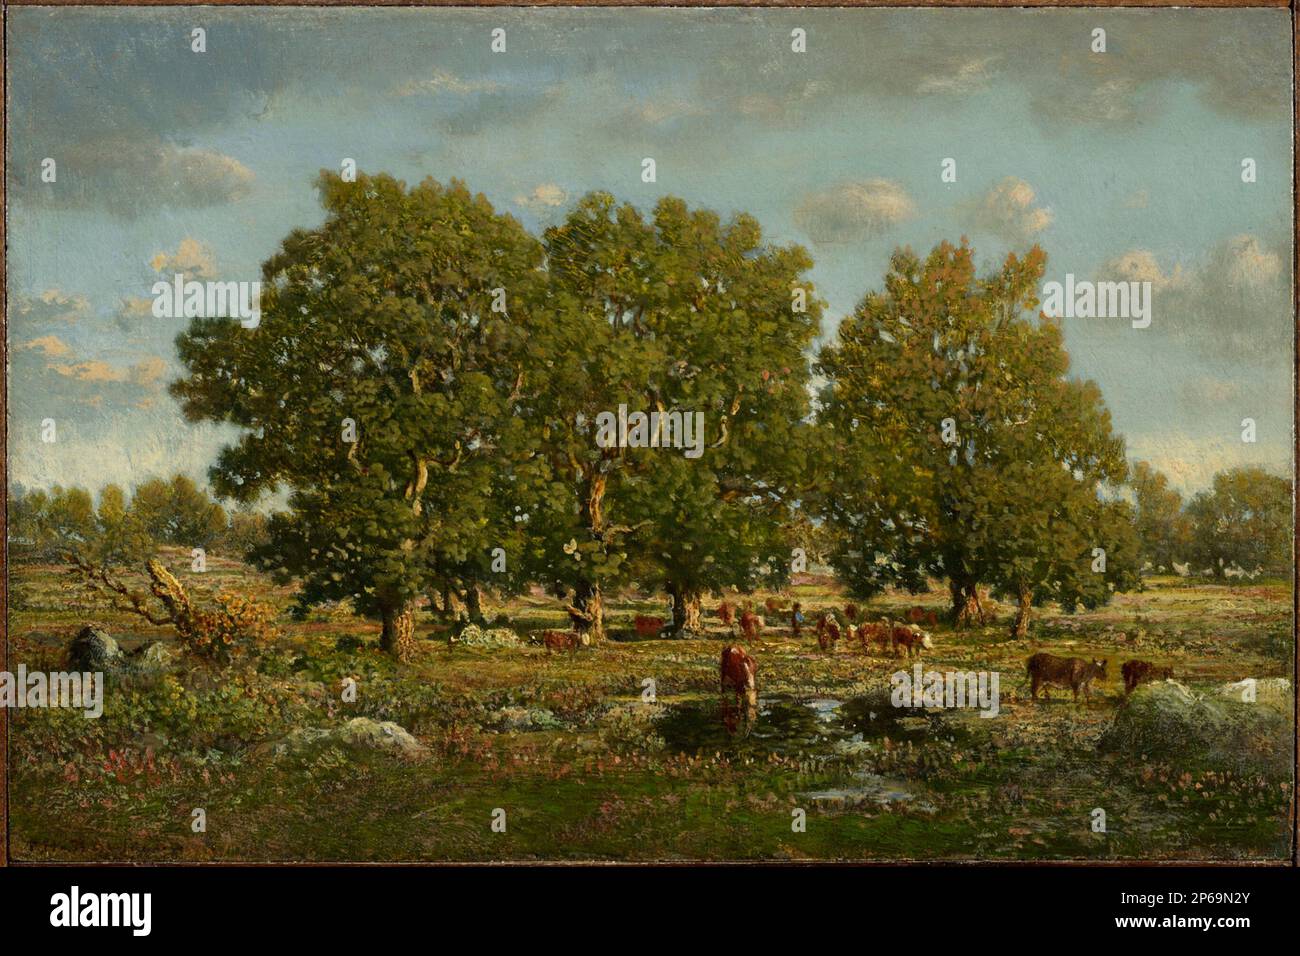 Théodore Rousseau, Landscape with Cows and Oaks, c. 1860, oil on panel. Stock Photo